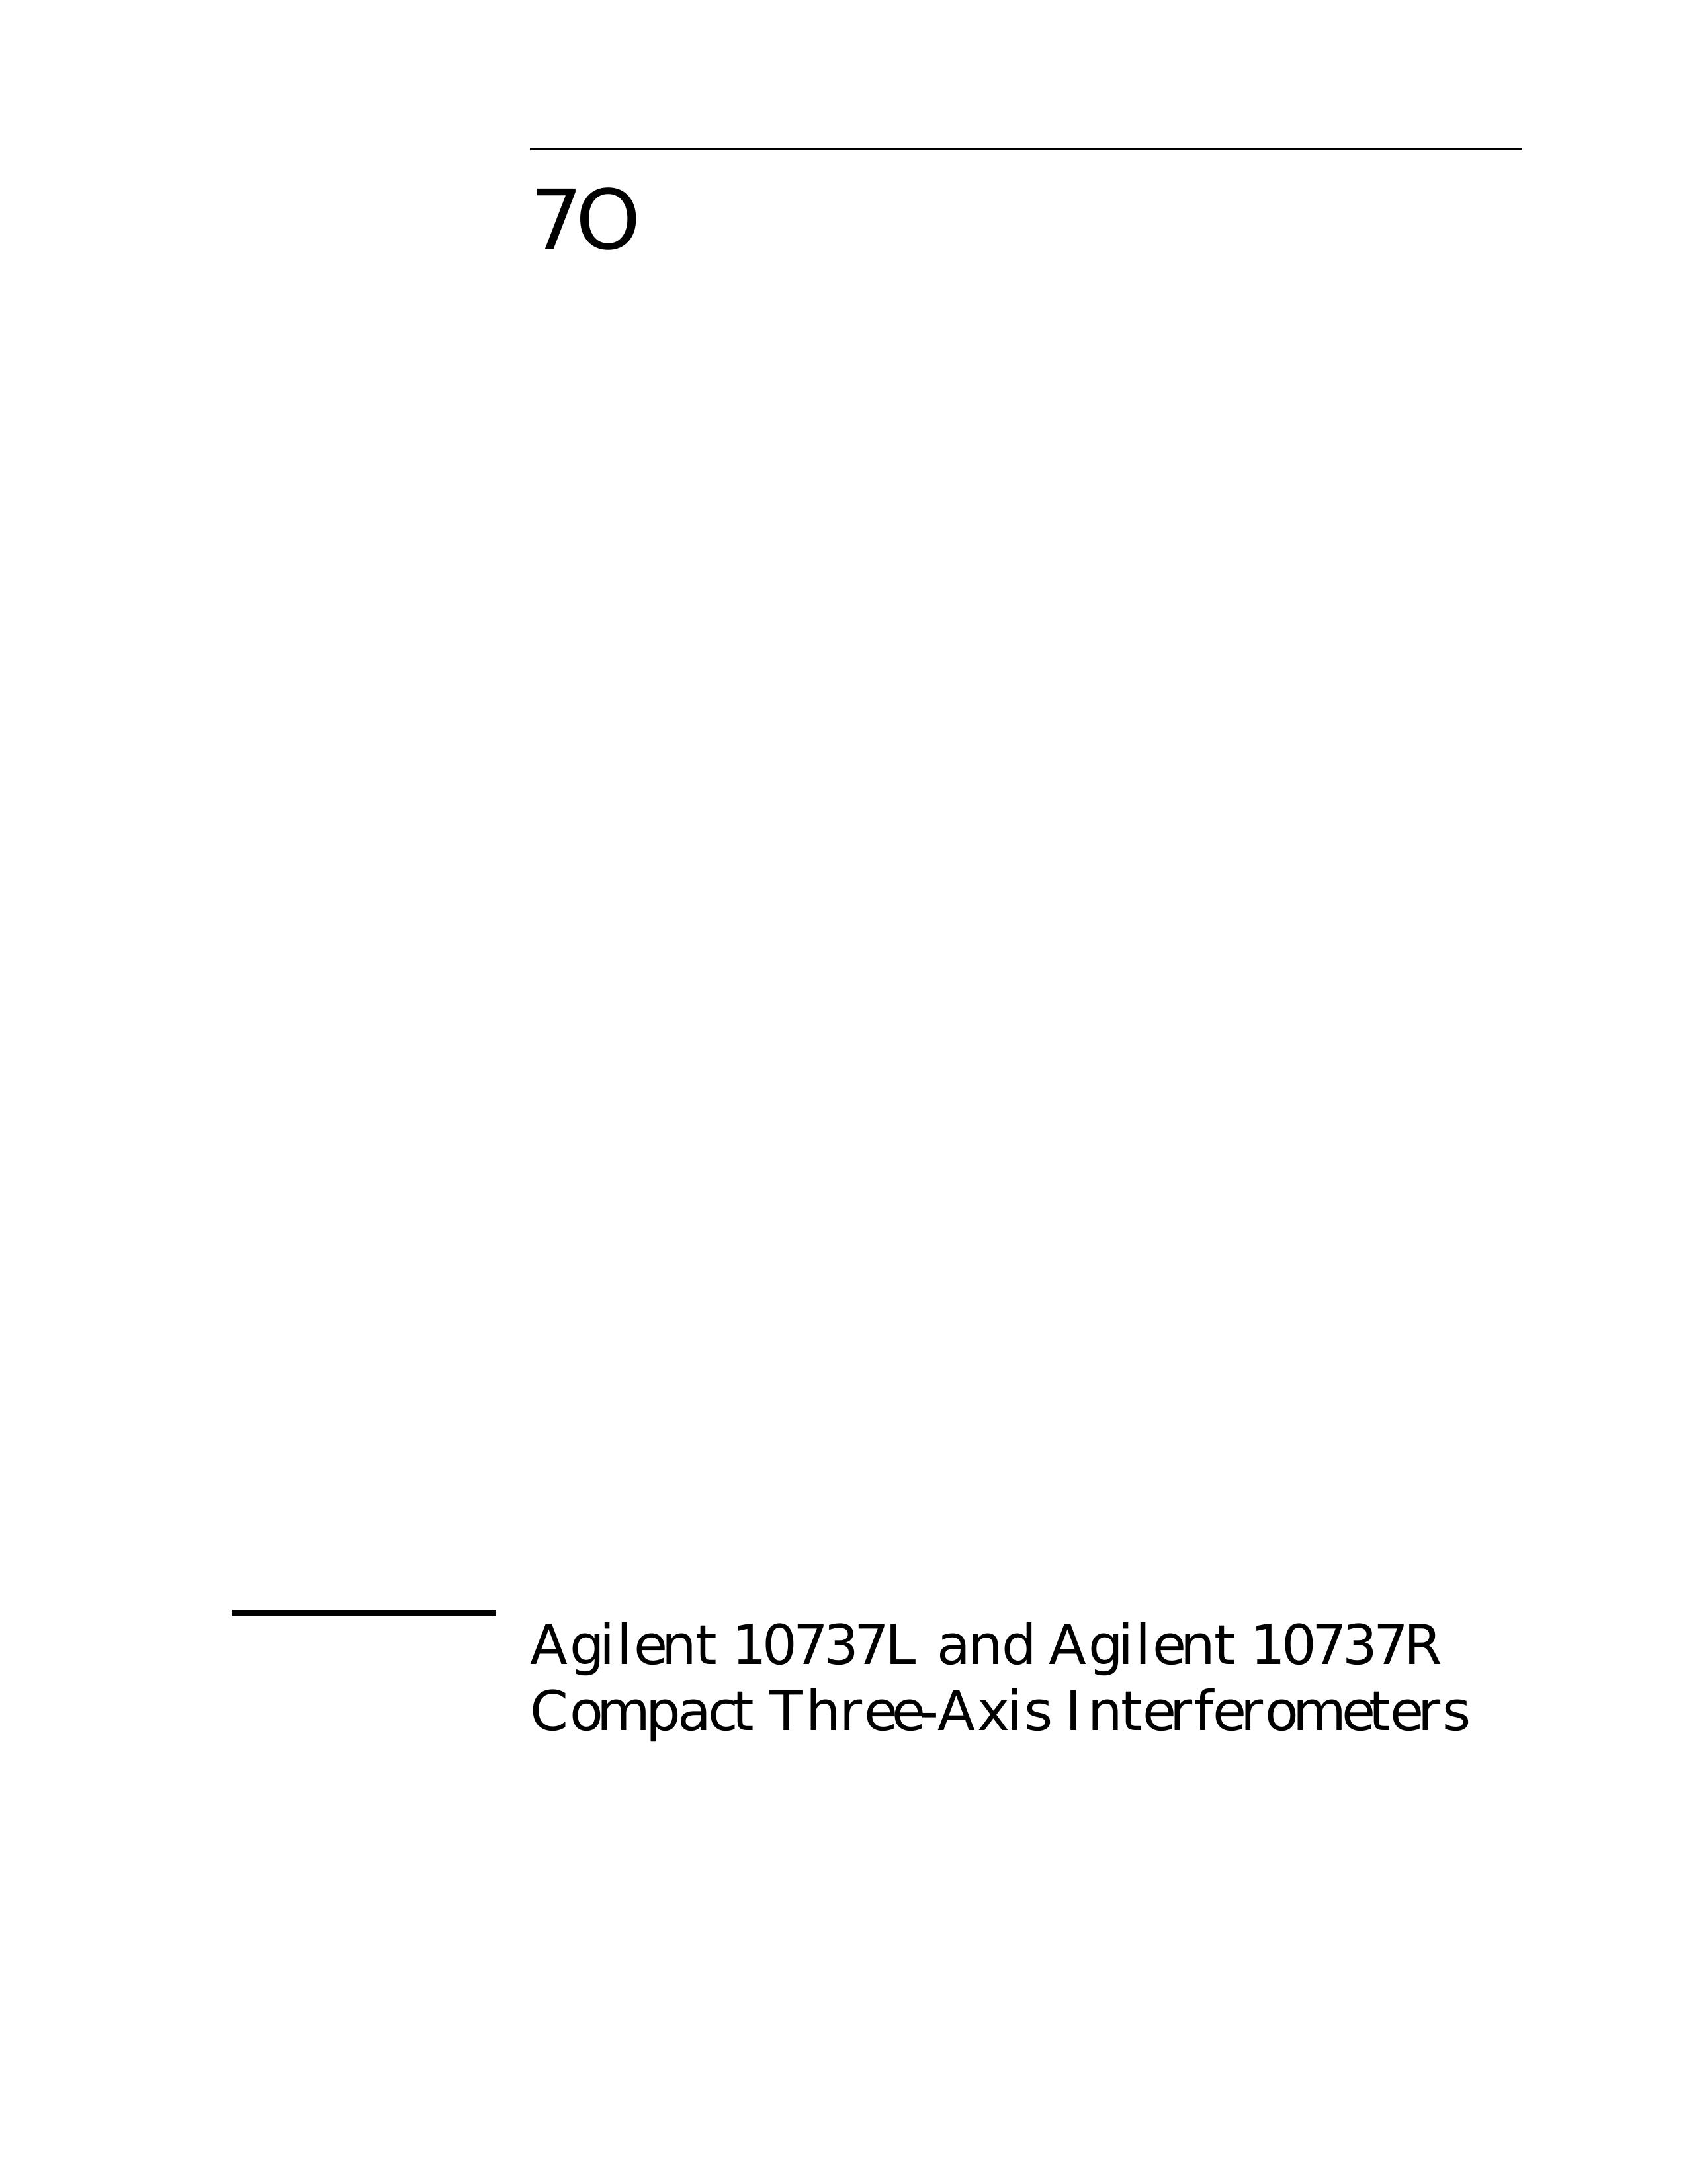 Agilent Technologies 10737R Washer/Dryer User Manual (Page 1)